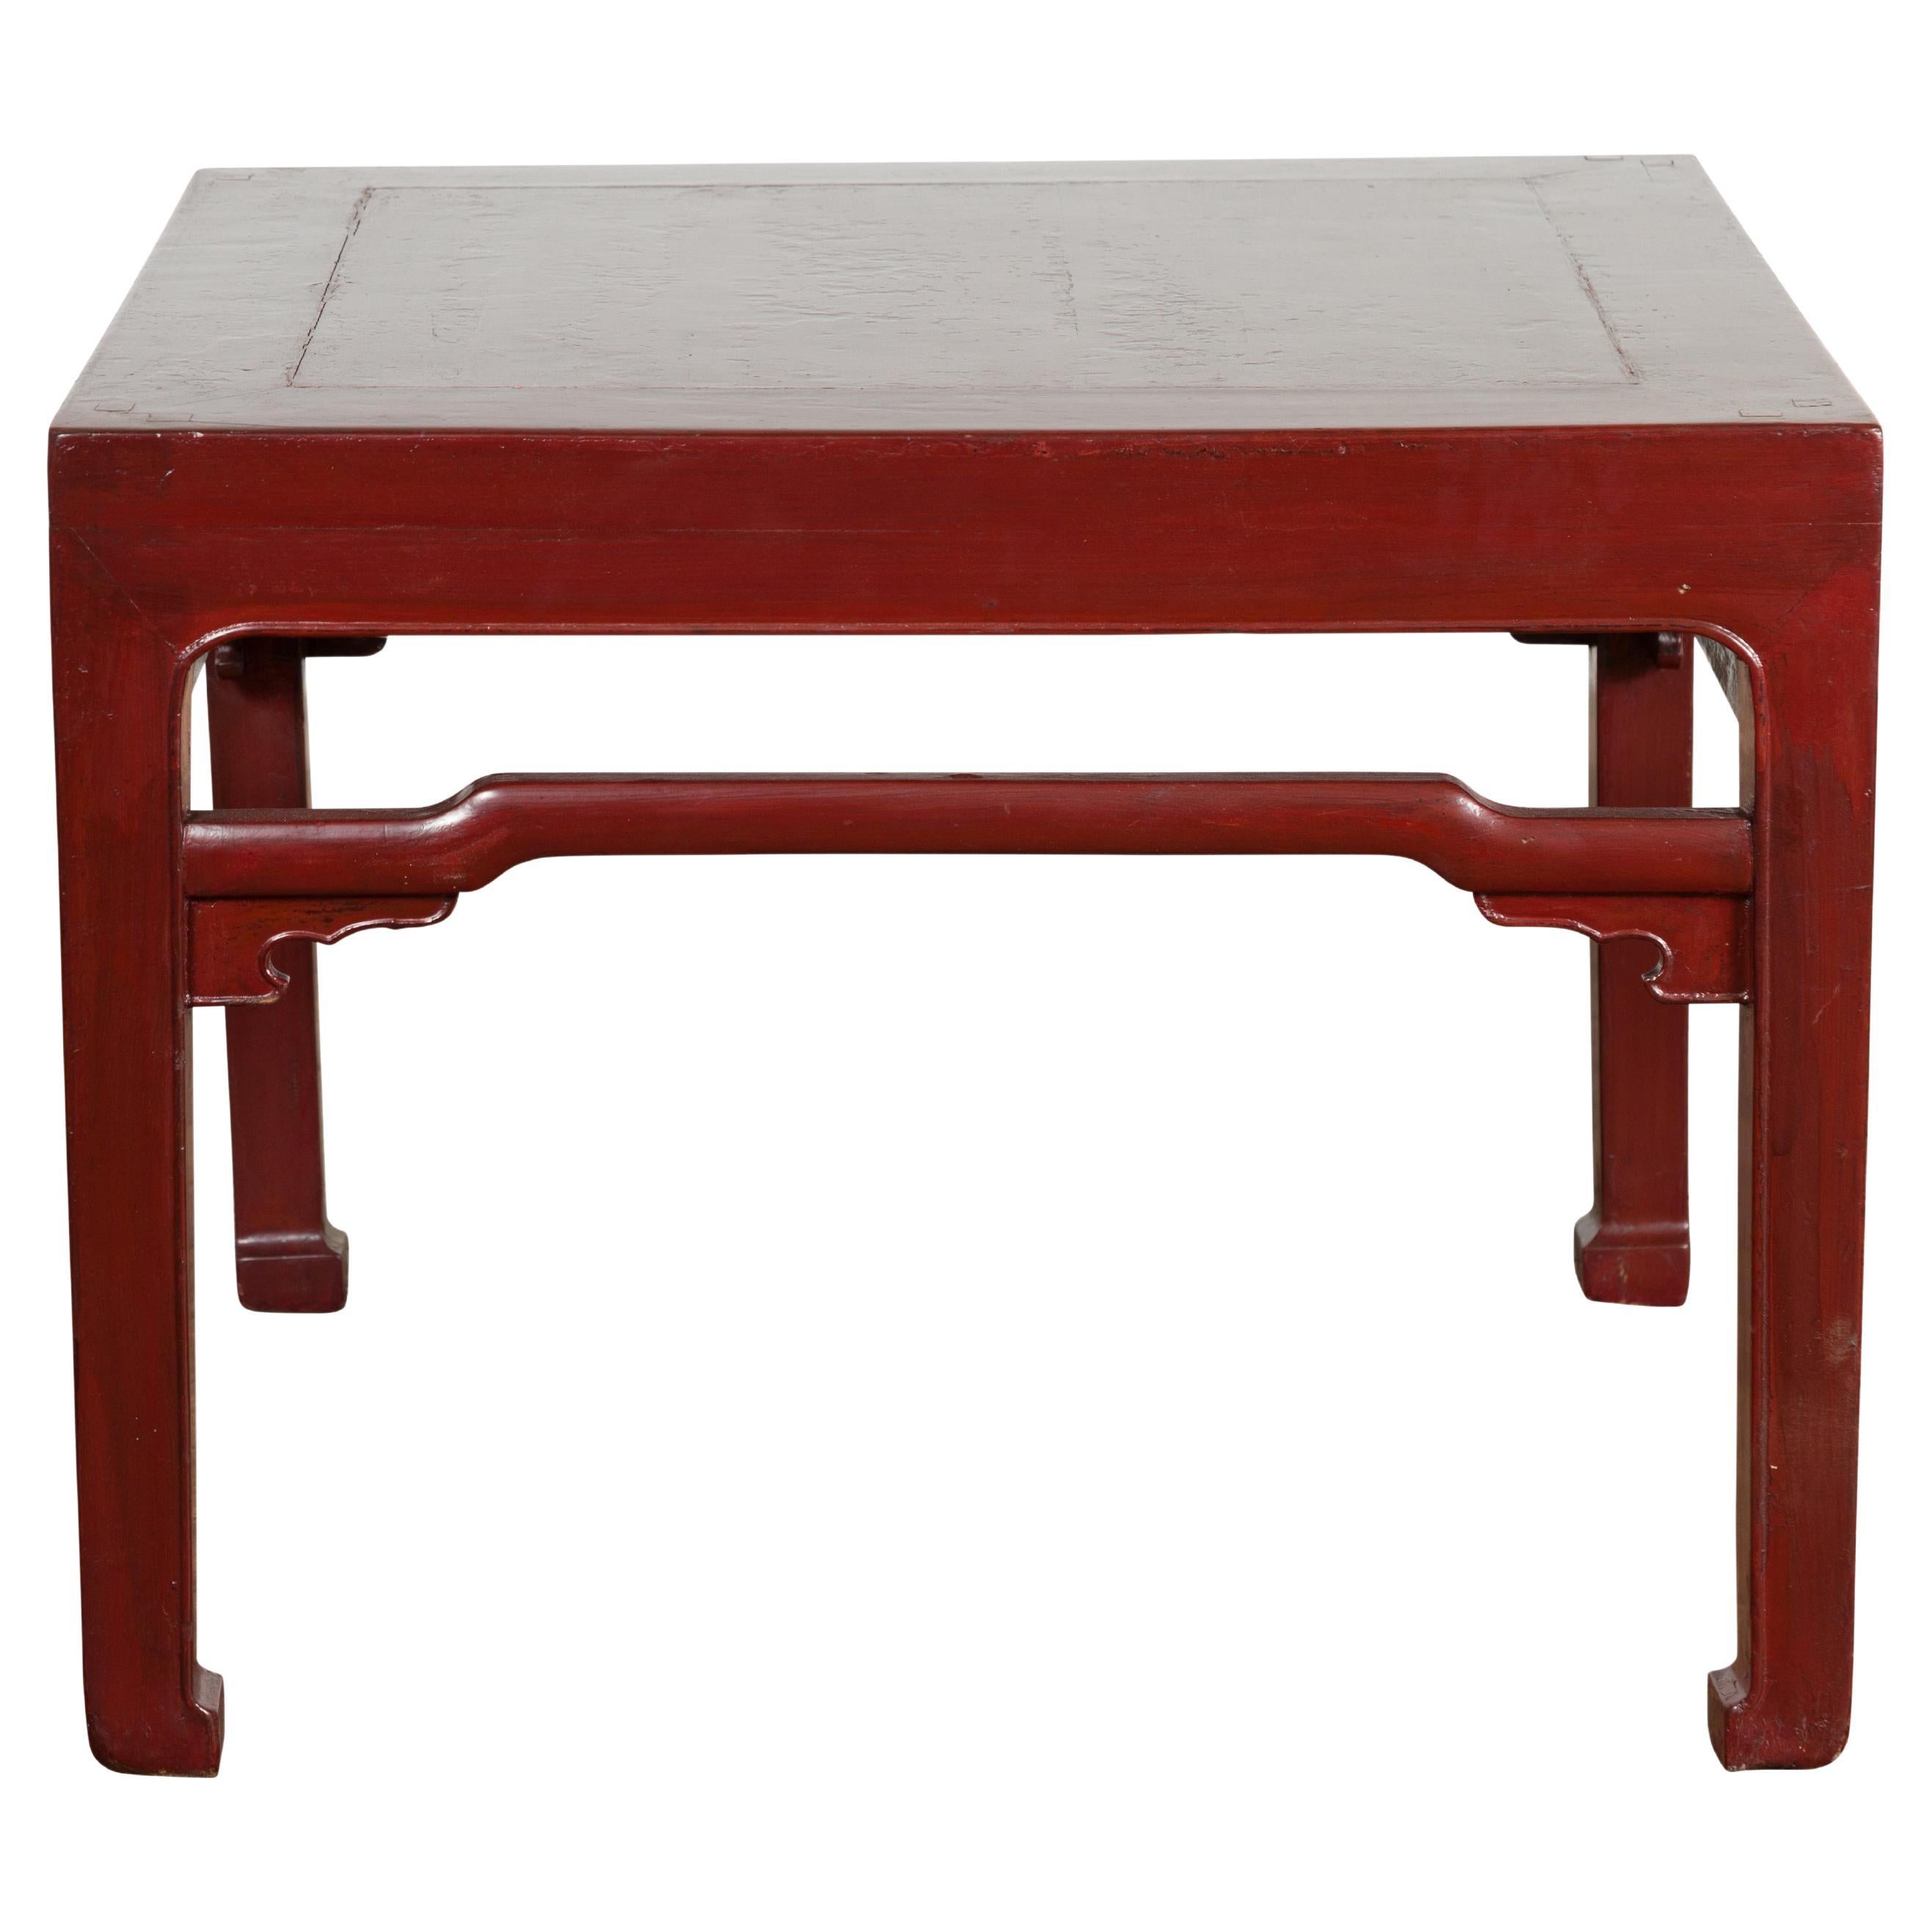 Chinese Late Qing Dynasty Period Red Lacquered Low Table with Horsehoof Feet For Sale